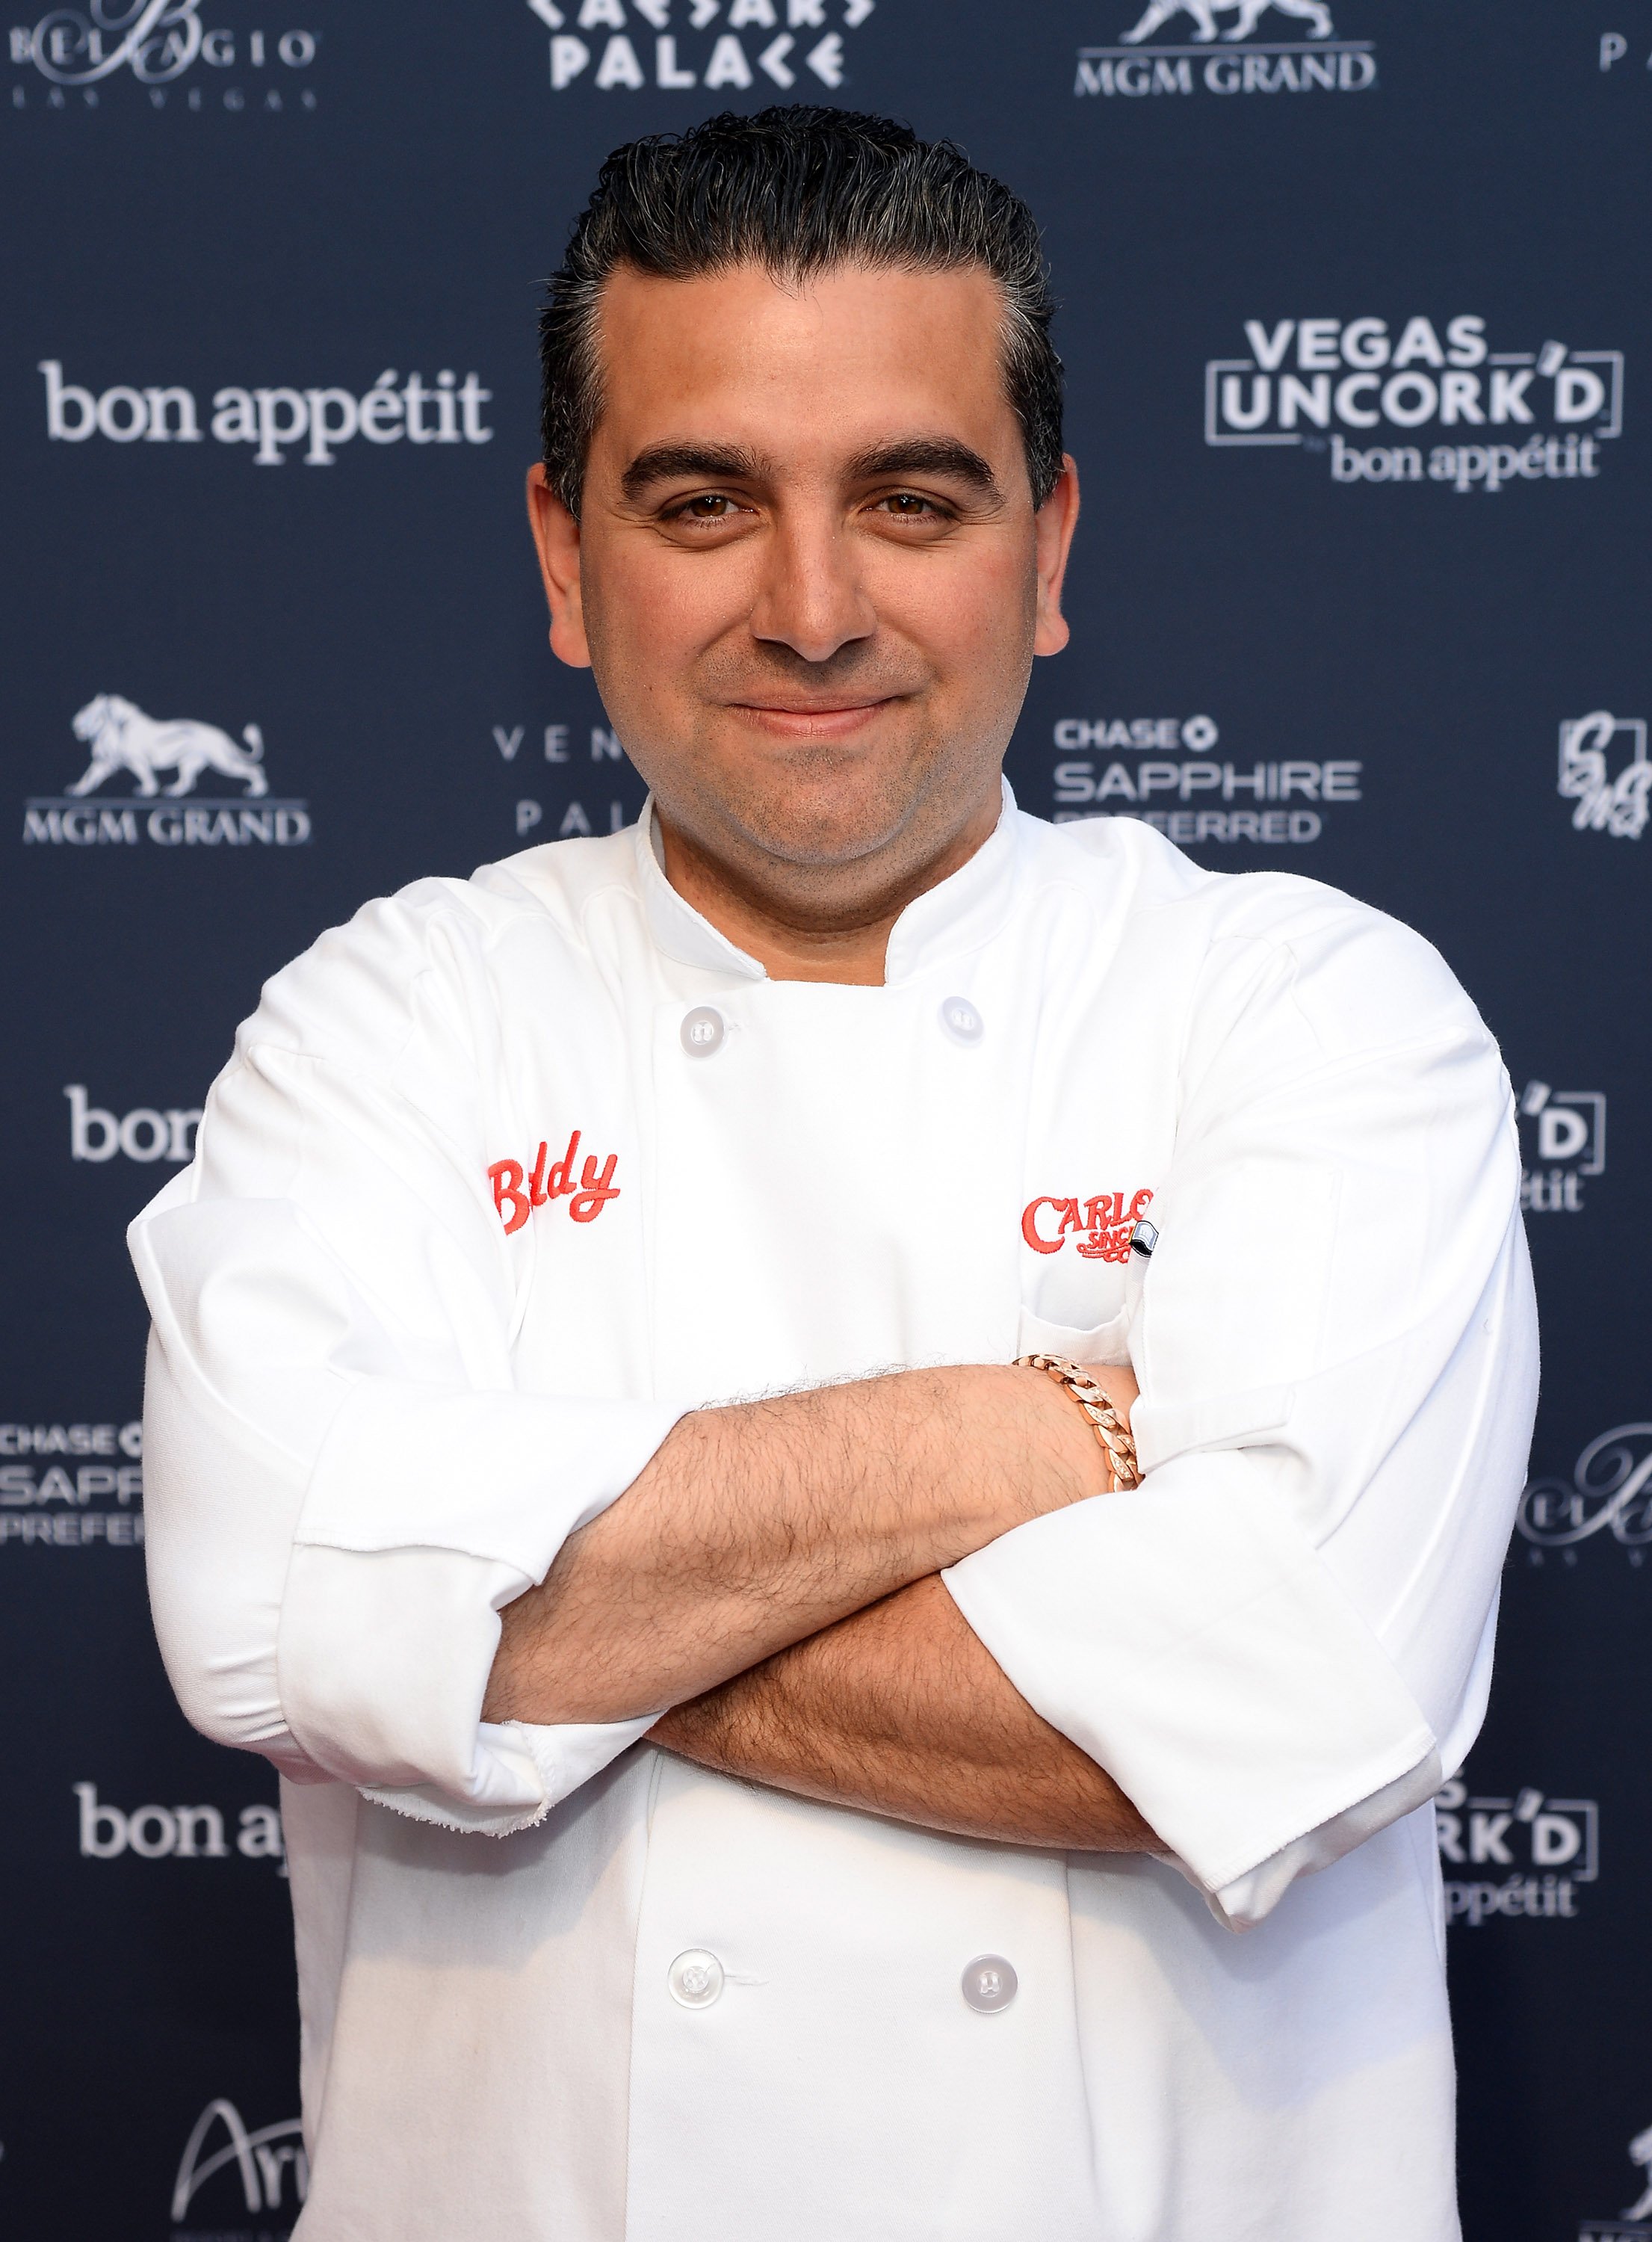 Buddy Valastro pictured at Vegas Uncork'd by Bon Appetit's Grand Tasting event at Caesars Palace, 2014, Las Vegas.  | Photo: Getty Images